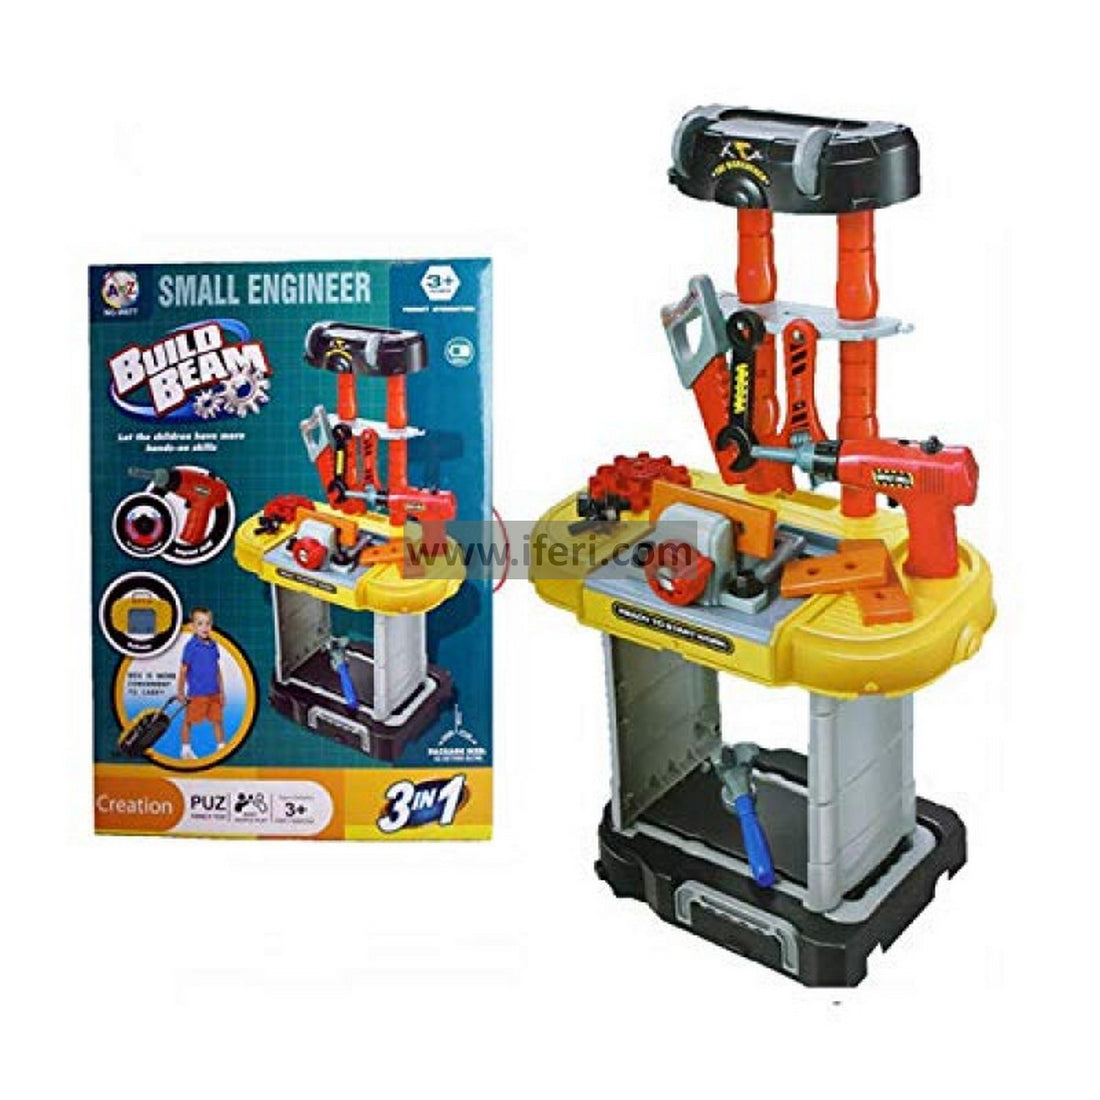 Buy Small Engineer Electric Maintenance Educational Toy from iferi.com in Bangladesh